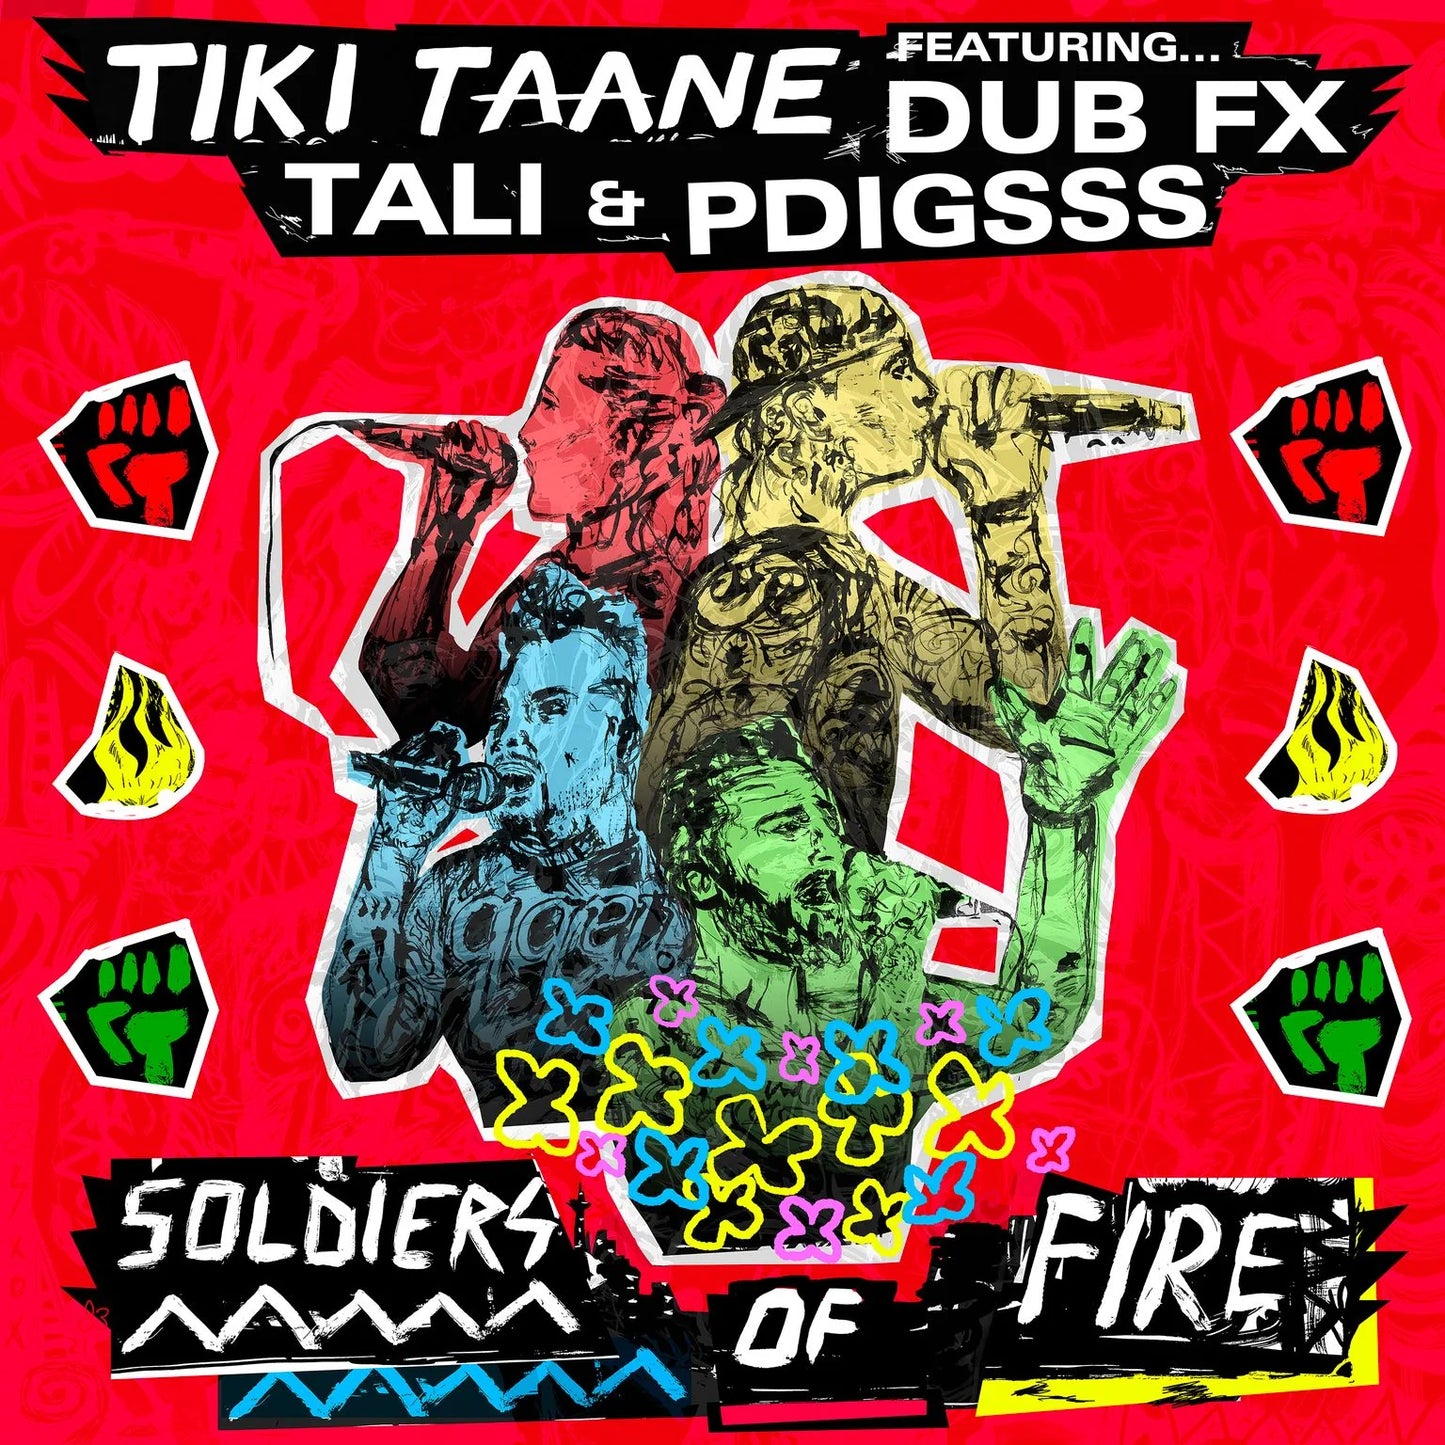 Tiki Taane - Soldiers of Fire | Buy the Vinyl EP from Flying Nun Records